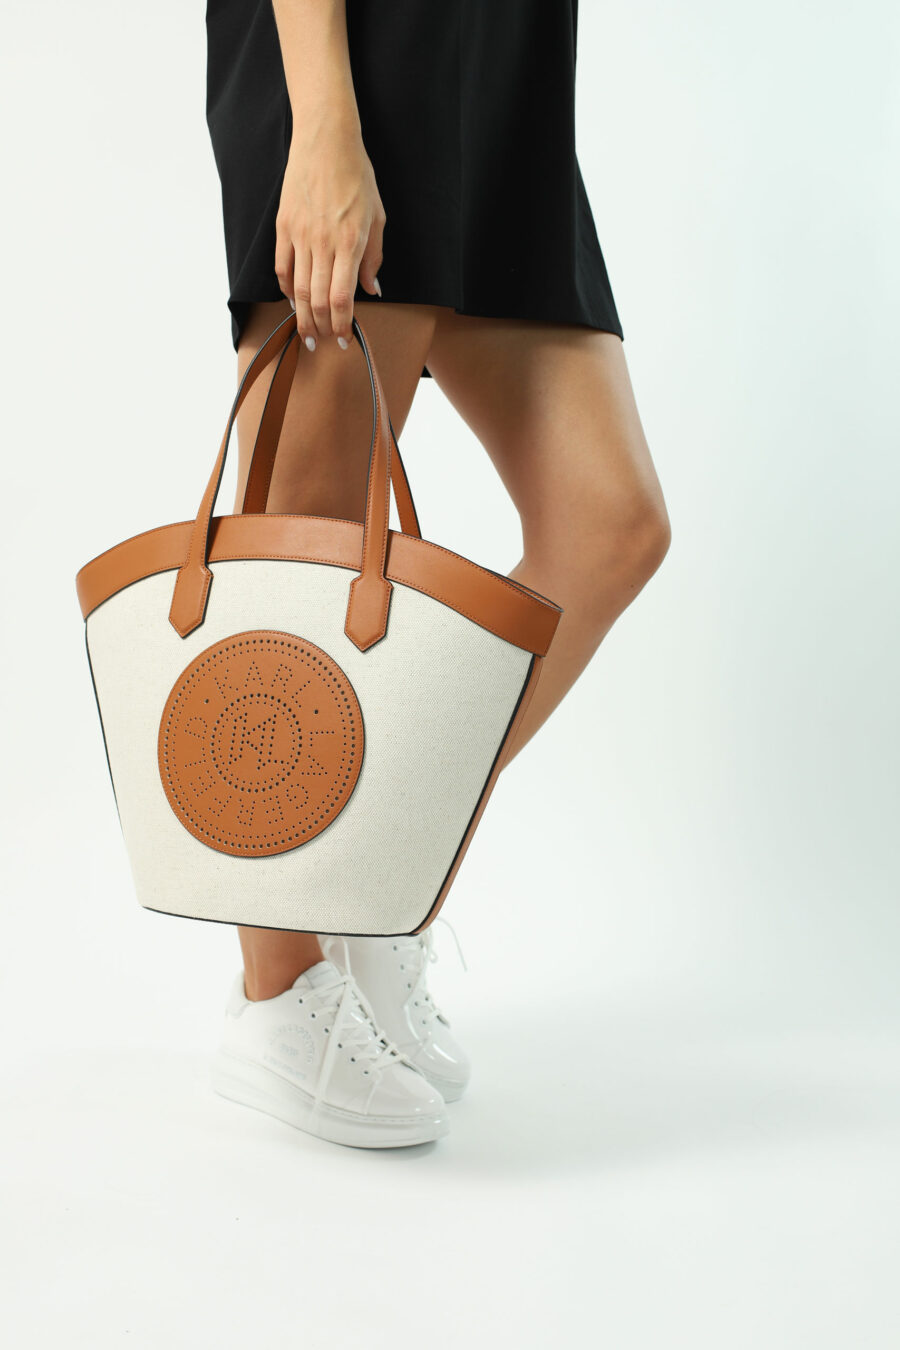 Tote bag white with brown and "k/tulip" logo - Photos 2833